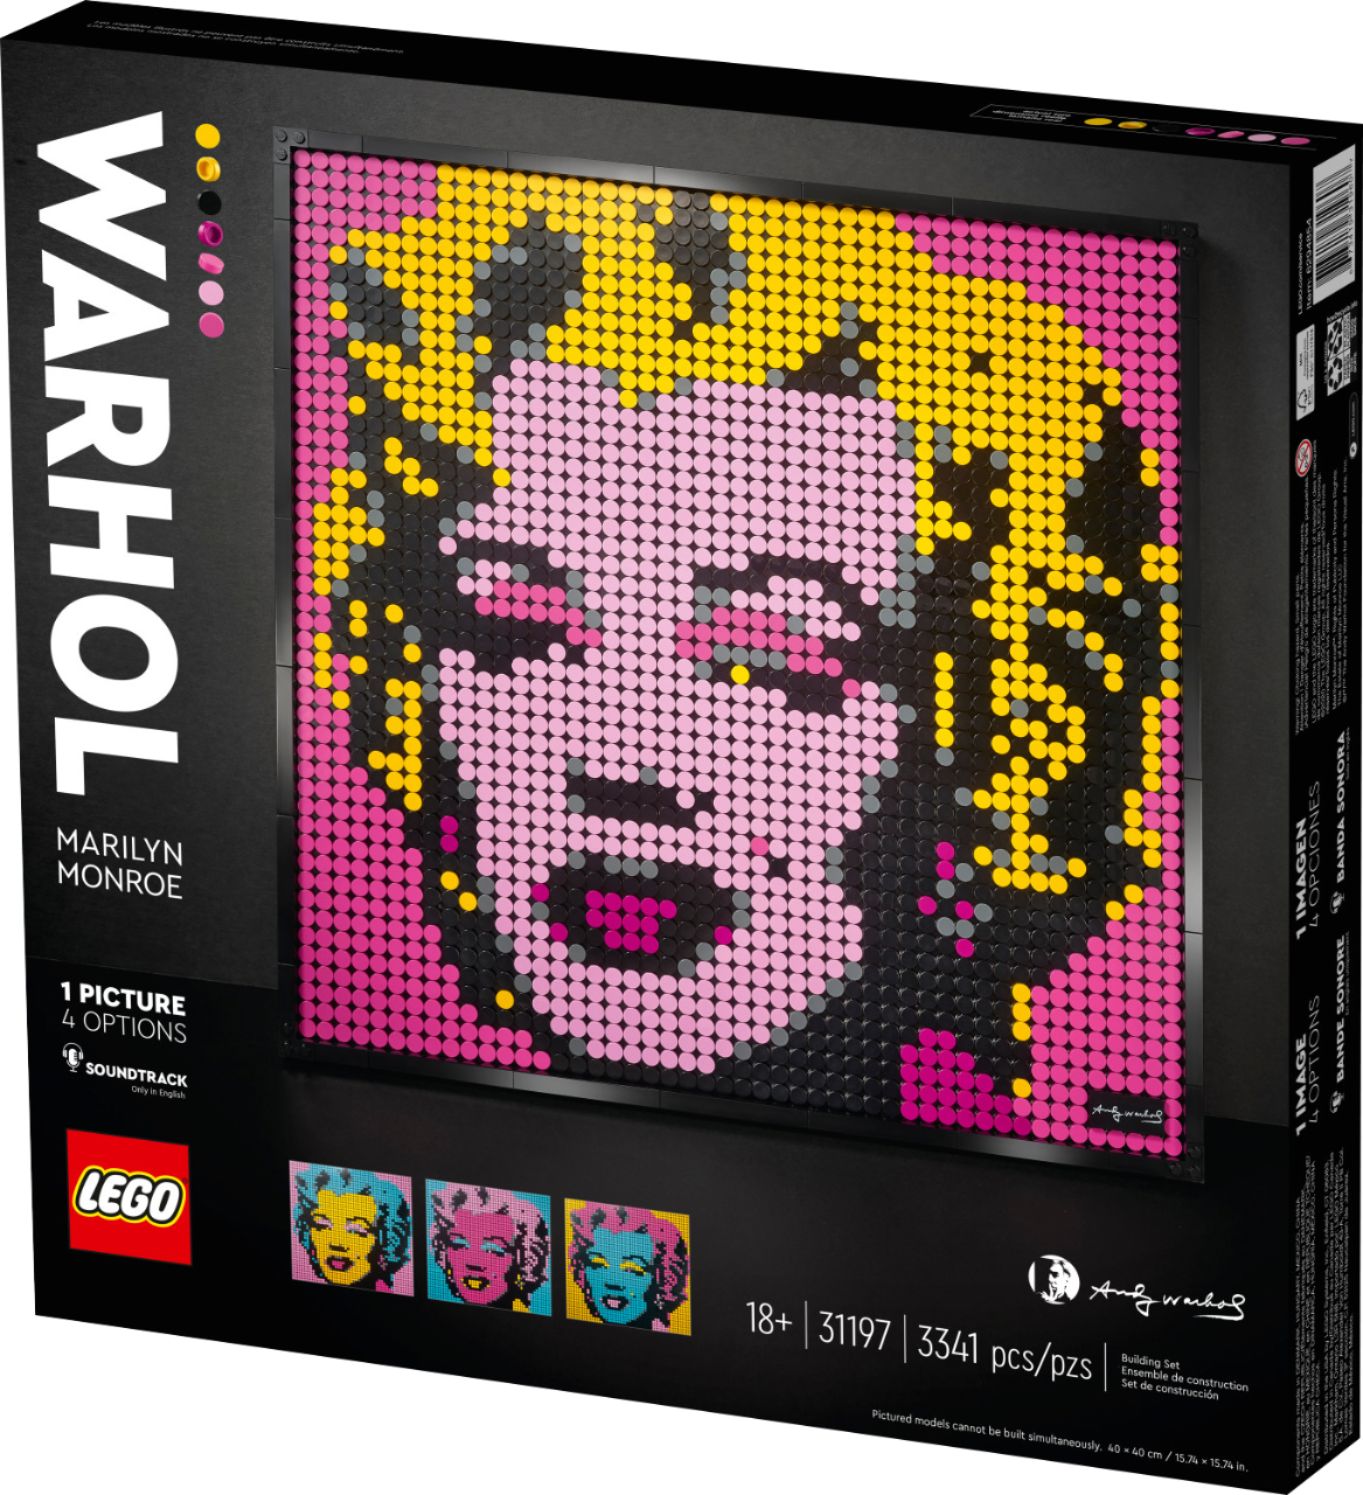 LEGO Warhol Marilyn Monroe 31197 3341 Pieces New and Sealed 